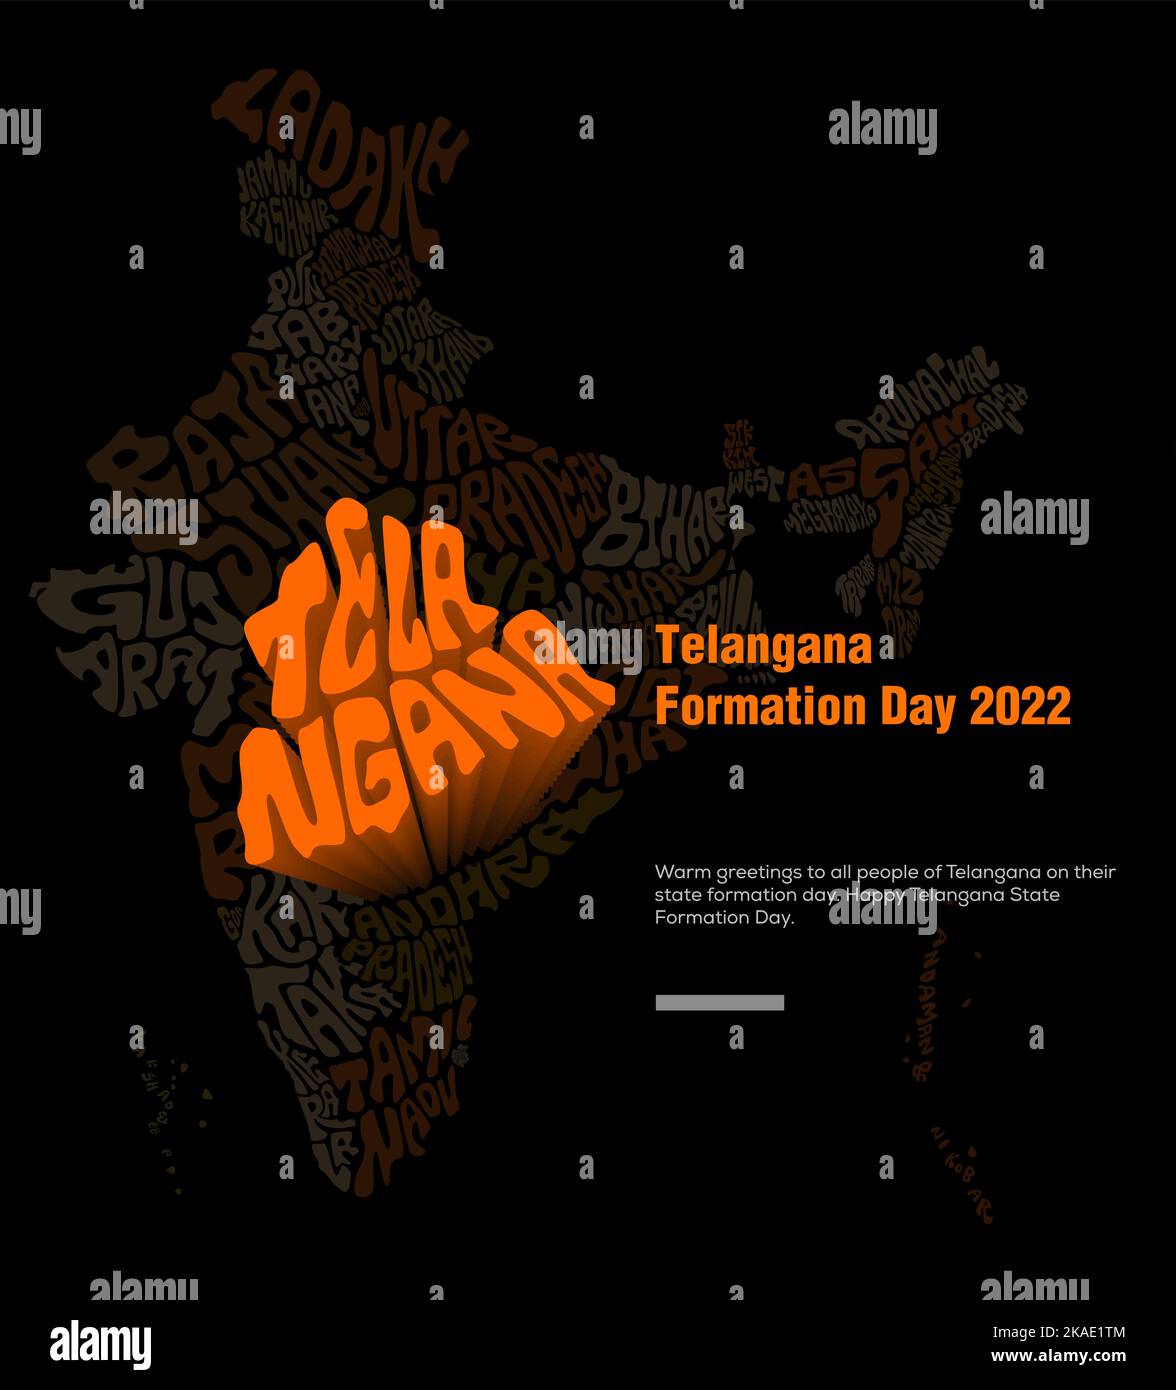 A vector design of word "Telangana" with artistic orange style in a map of words on dark background Stock Vector